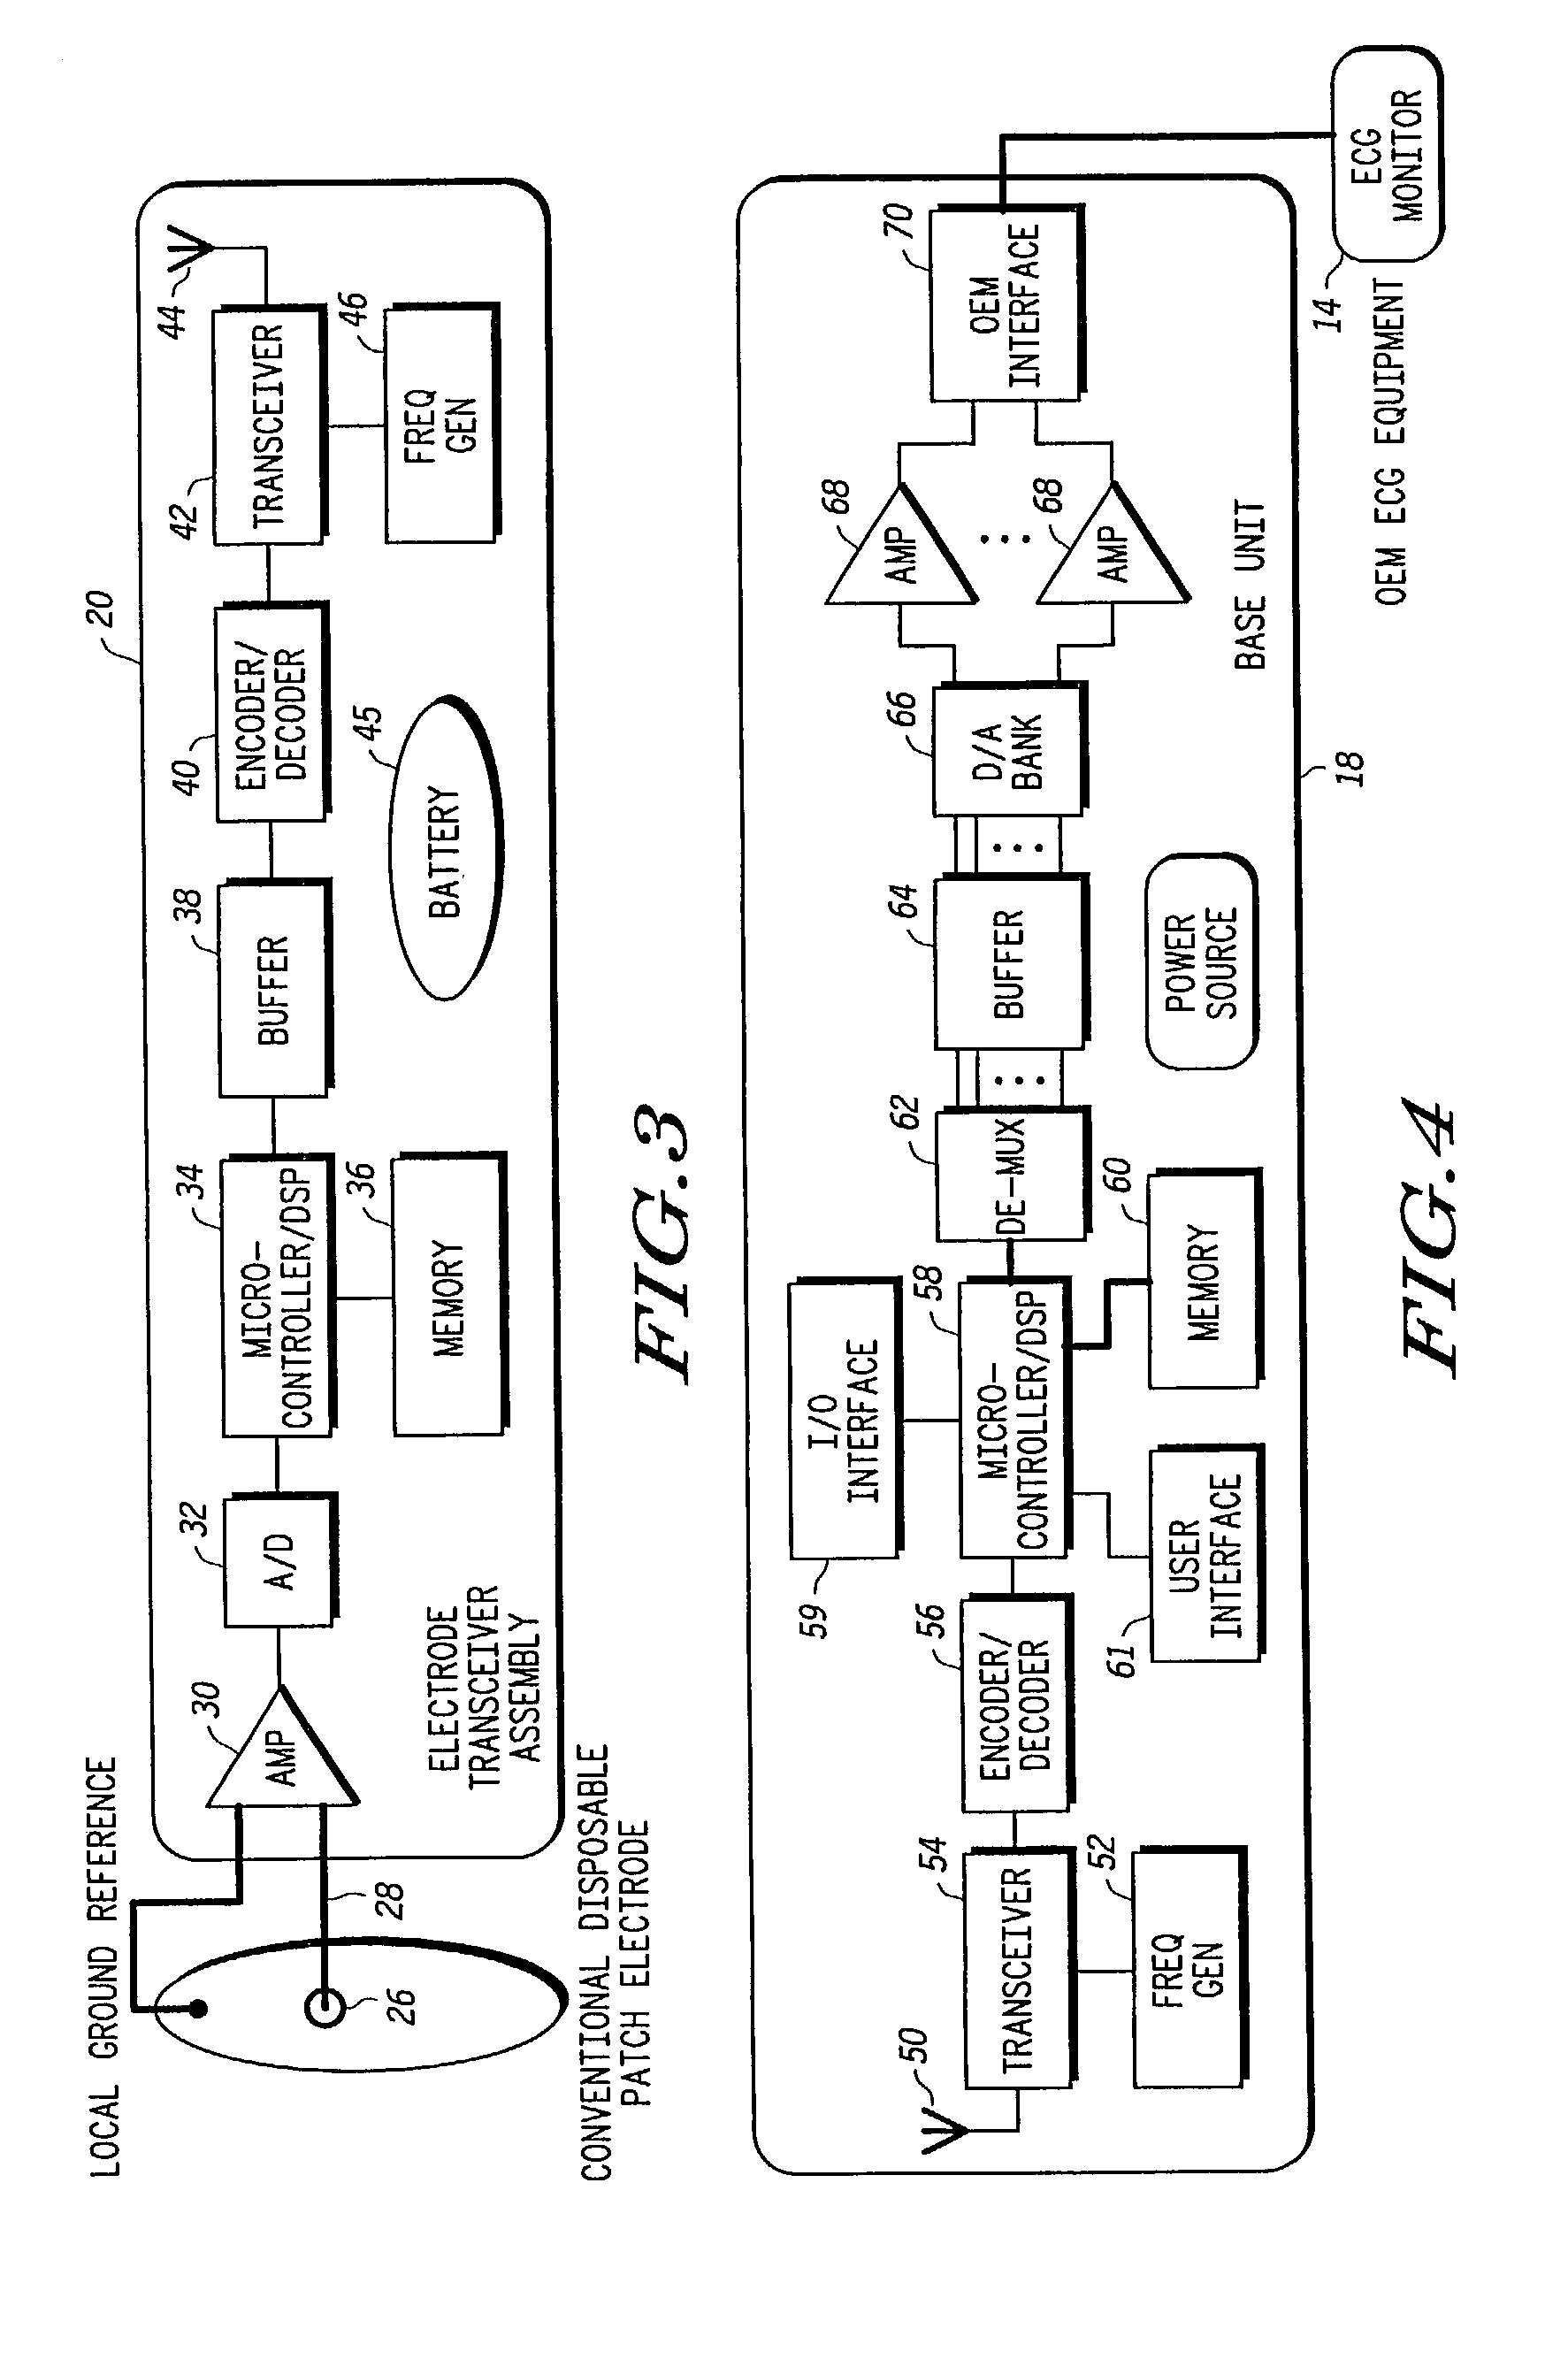 Programmable wireless electrode system for medical monitoring